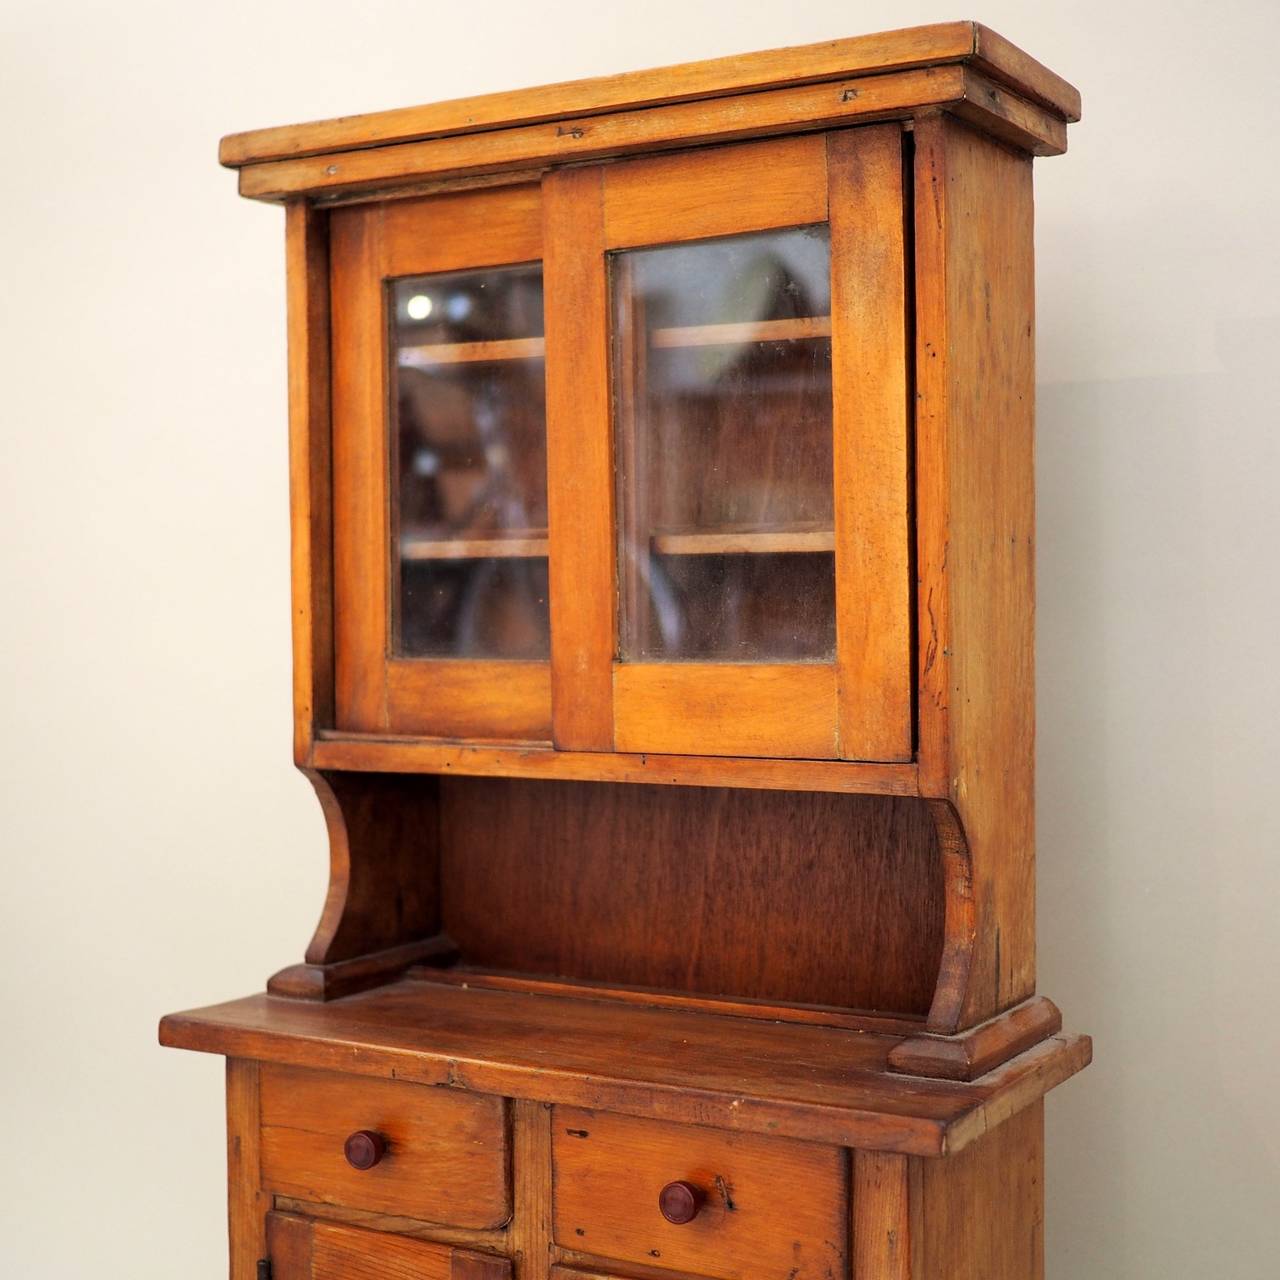 Most probably an apprentice piece, or built for a child. Typical form, with glazed doors above, drawers and cupboards below.